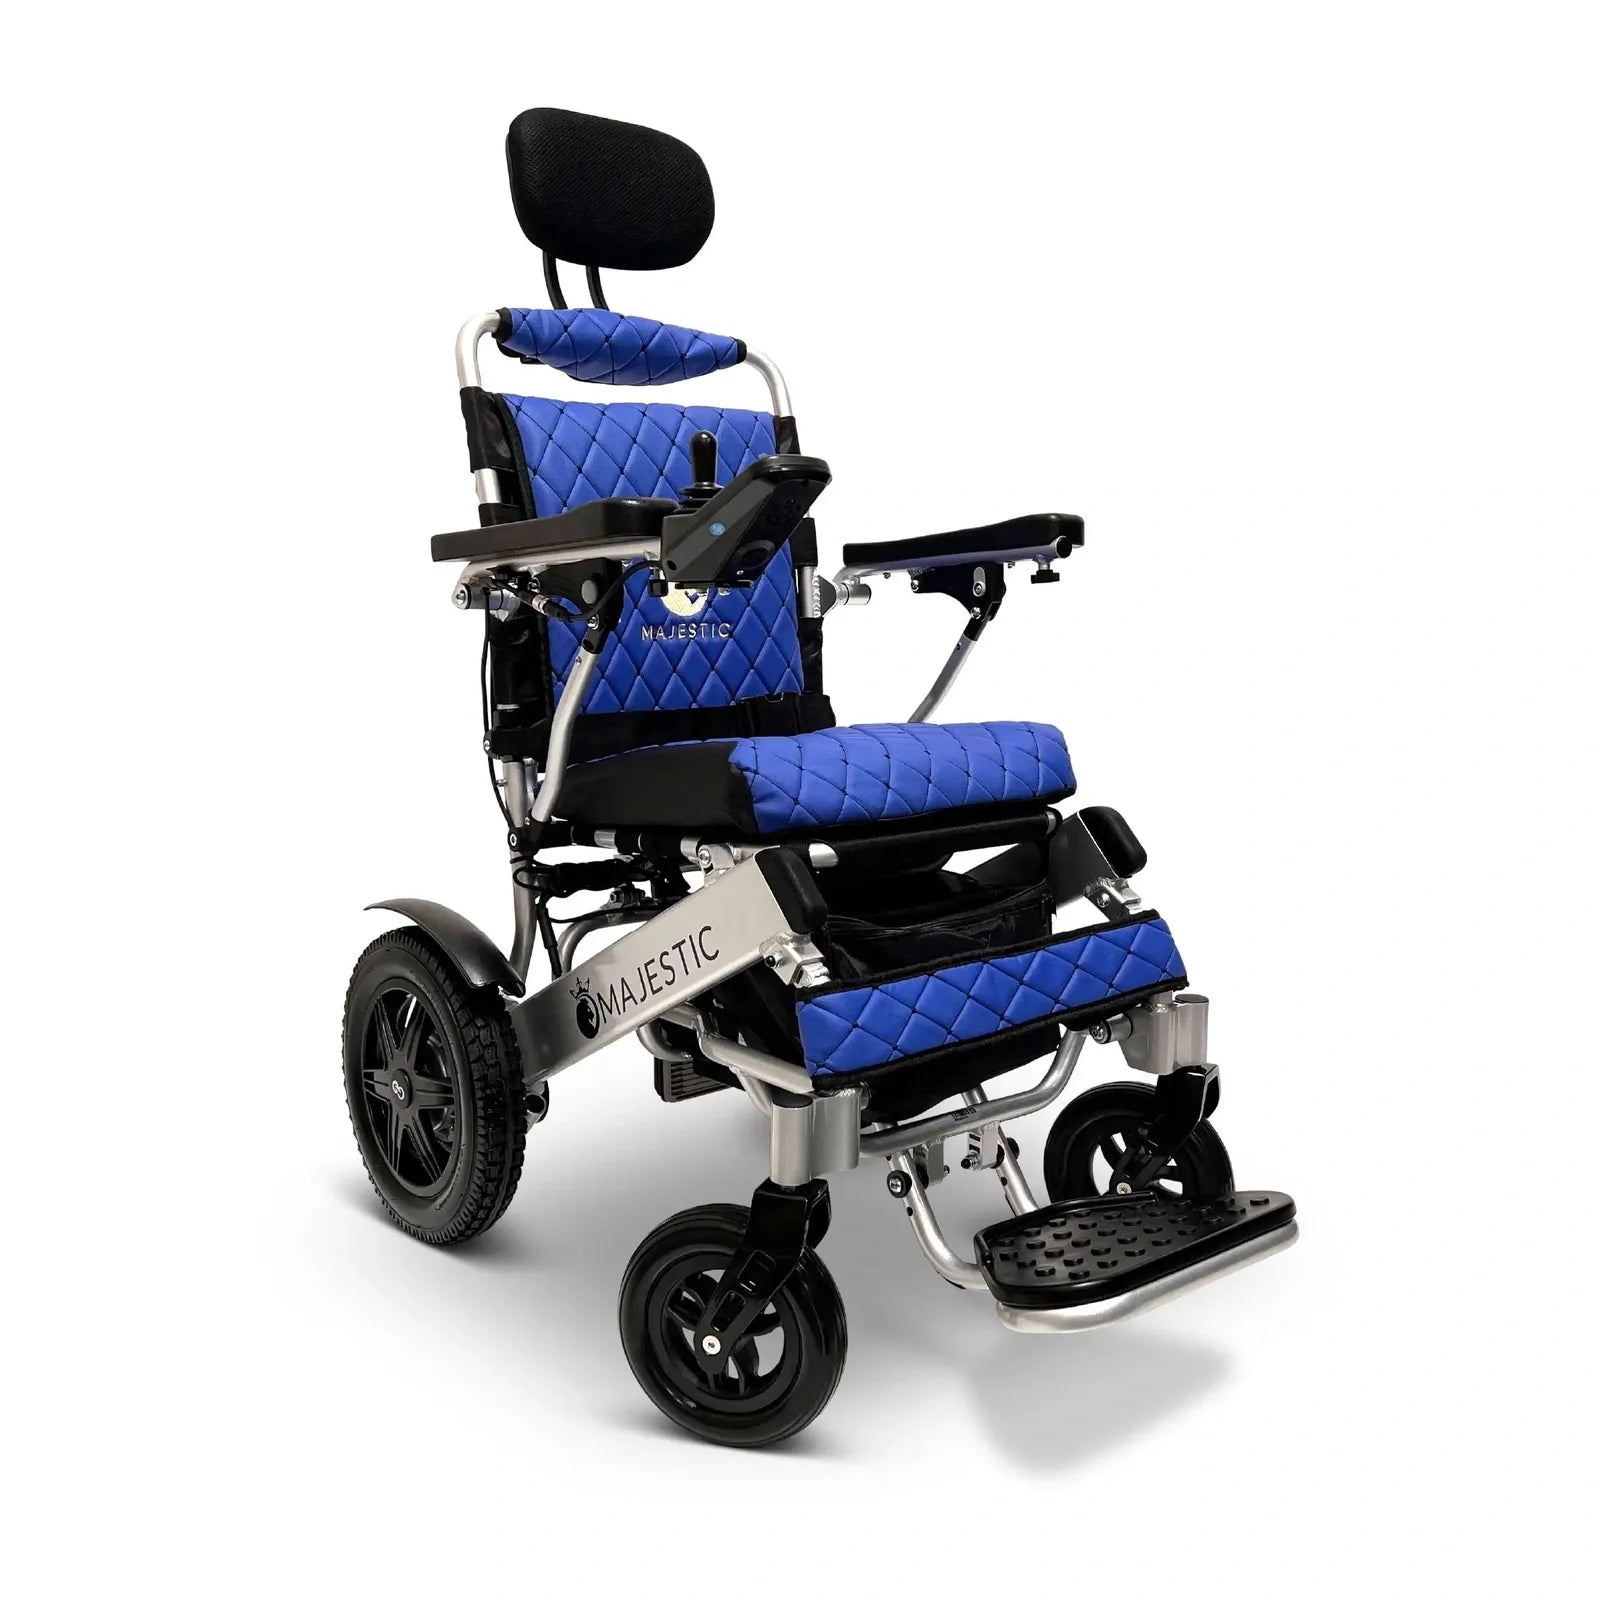 ComfyGO Majestic IQ-9000 Long Range Remote Controlled Folding Reclining Electric Wheelchair Power Wheelchairs ComfyGO Silver Blue Auto Reclining